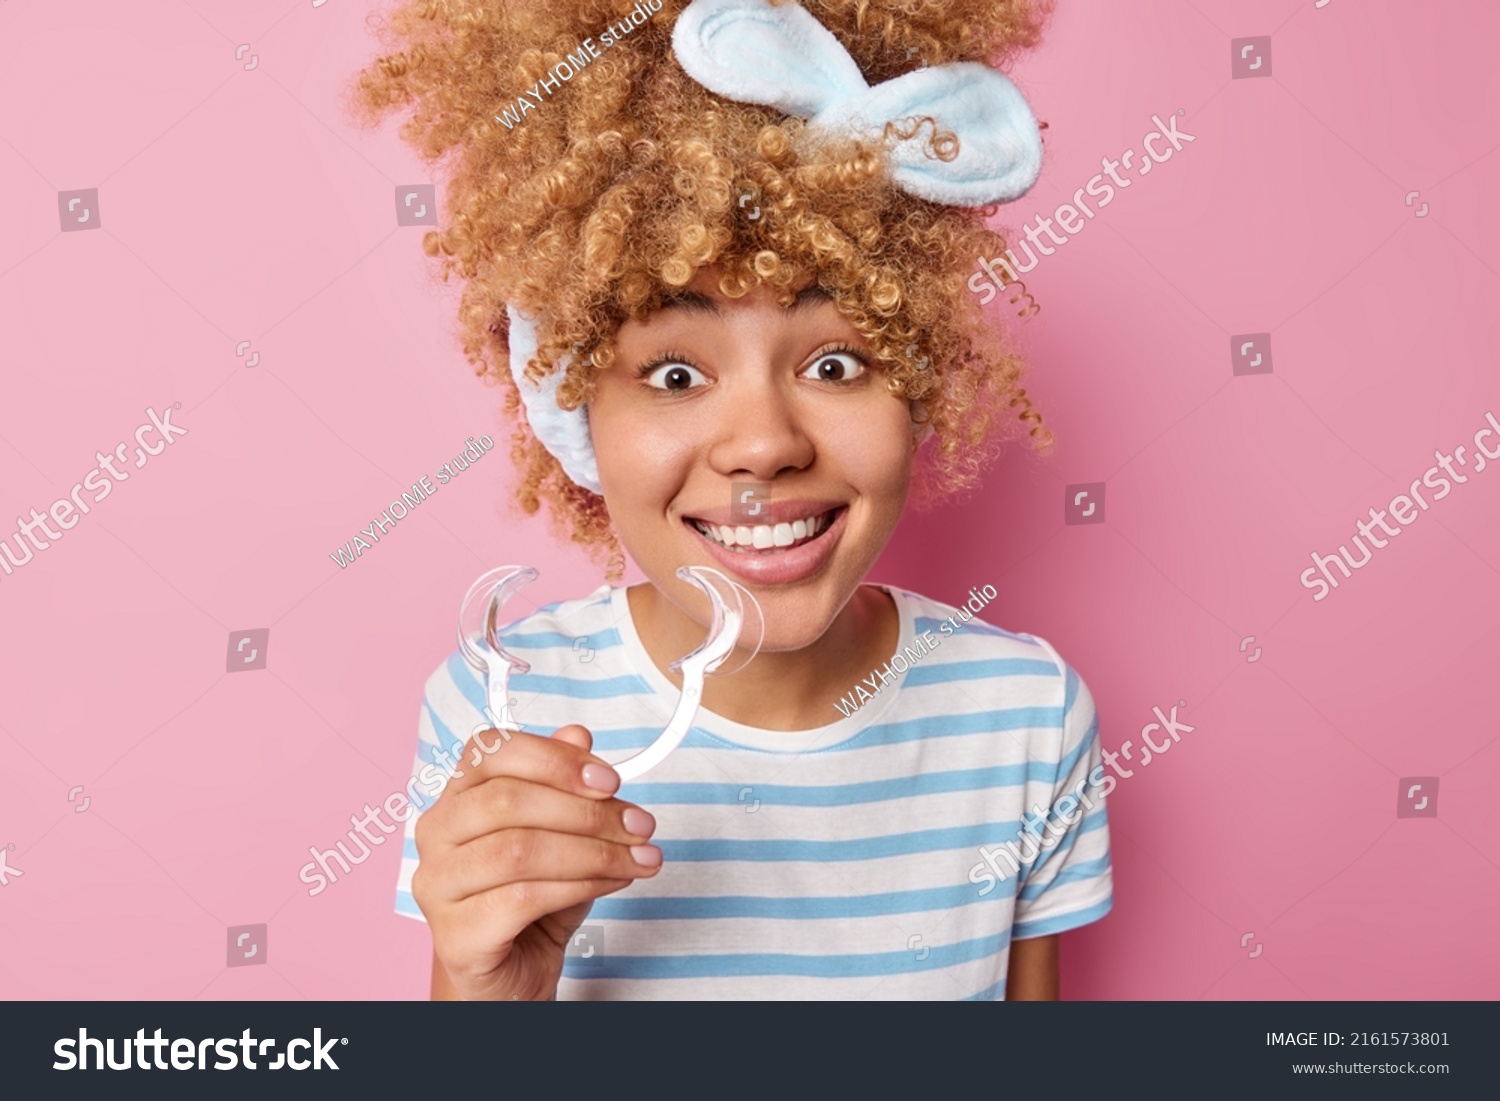 Curly Blonde Hair Illustration - wide 10